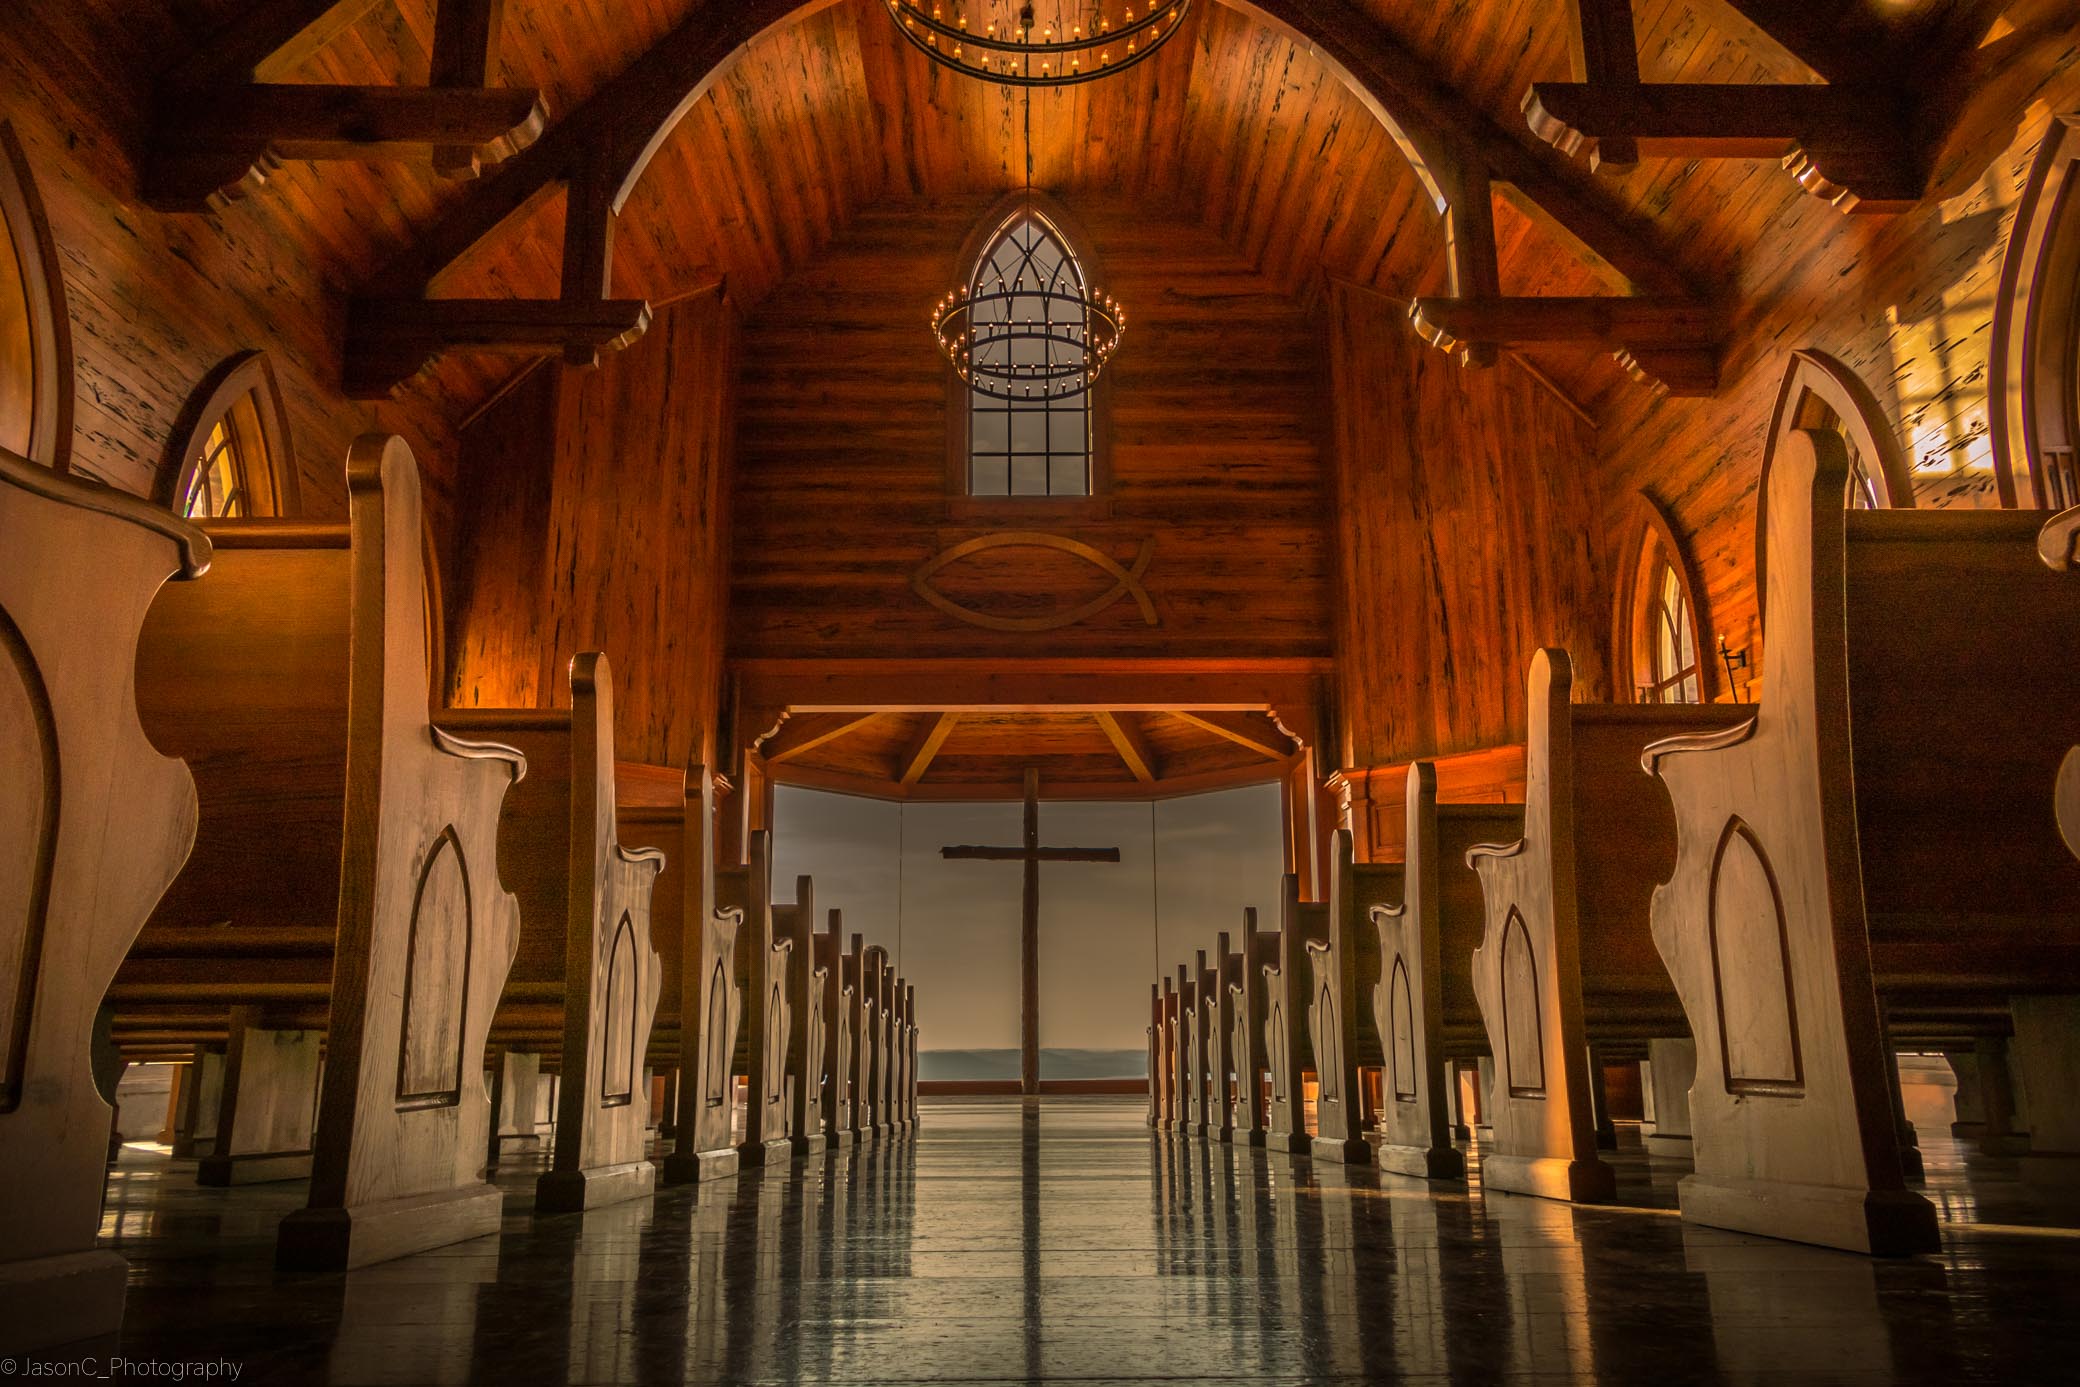 Wallpaper, building, wood, symmetry, orange, arch, church, God, interior design, chapel, perspective, view, wedding, indoor, framed, basilica, tourist attraction, place of worship, aisle, graphy 2080x1387